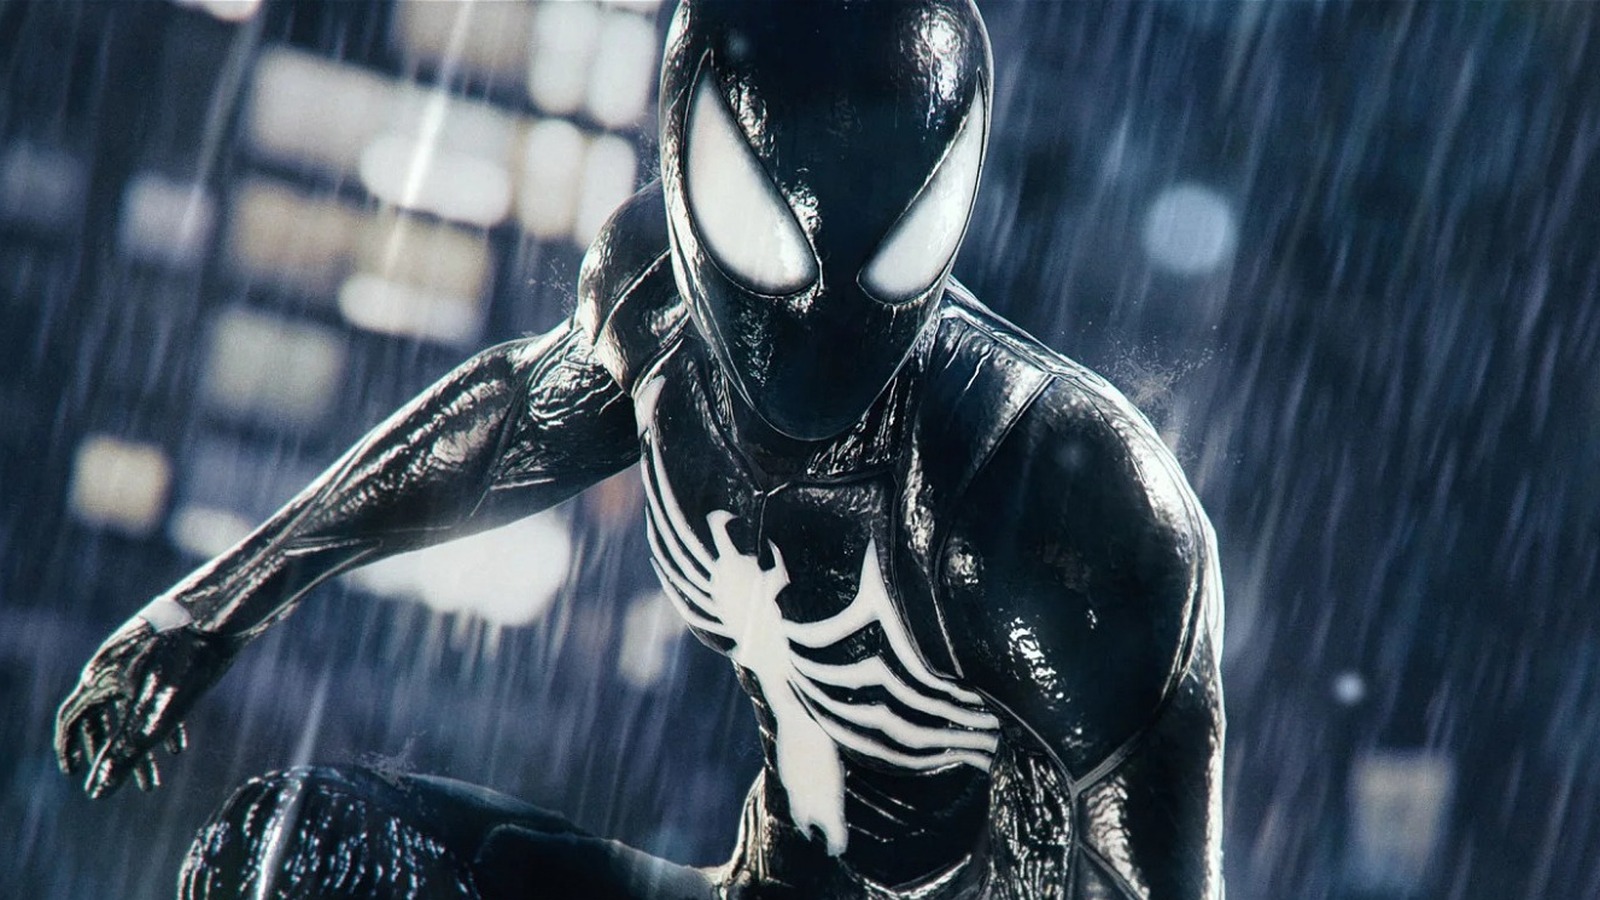 The Amazing Spider-Man 2 Game Coming Soon - Game Informer